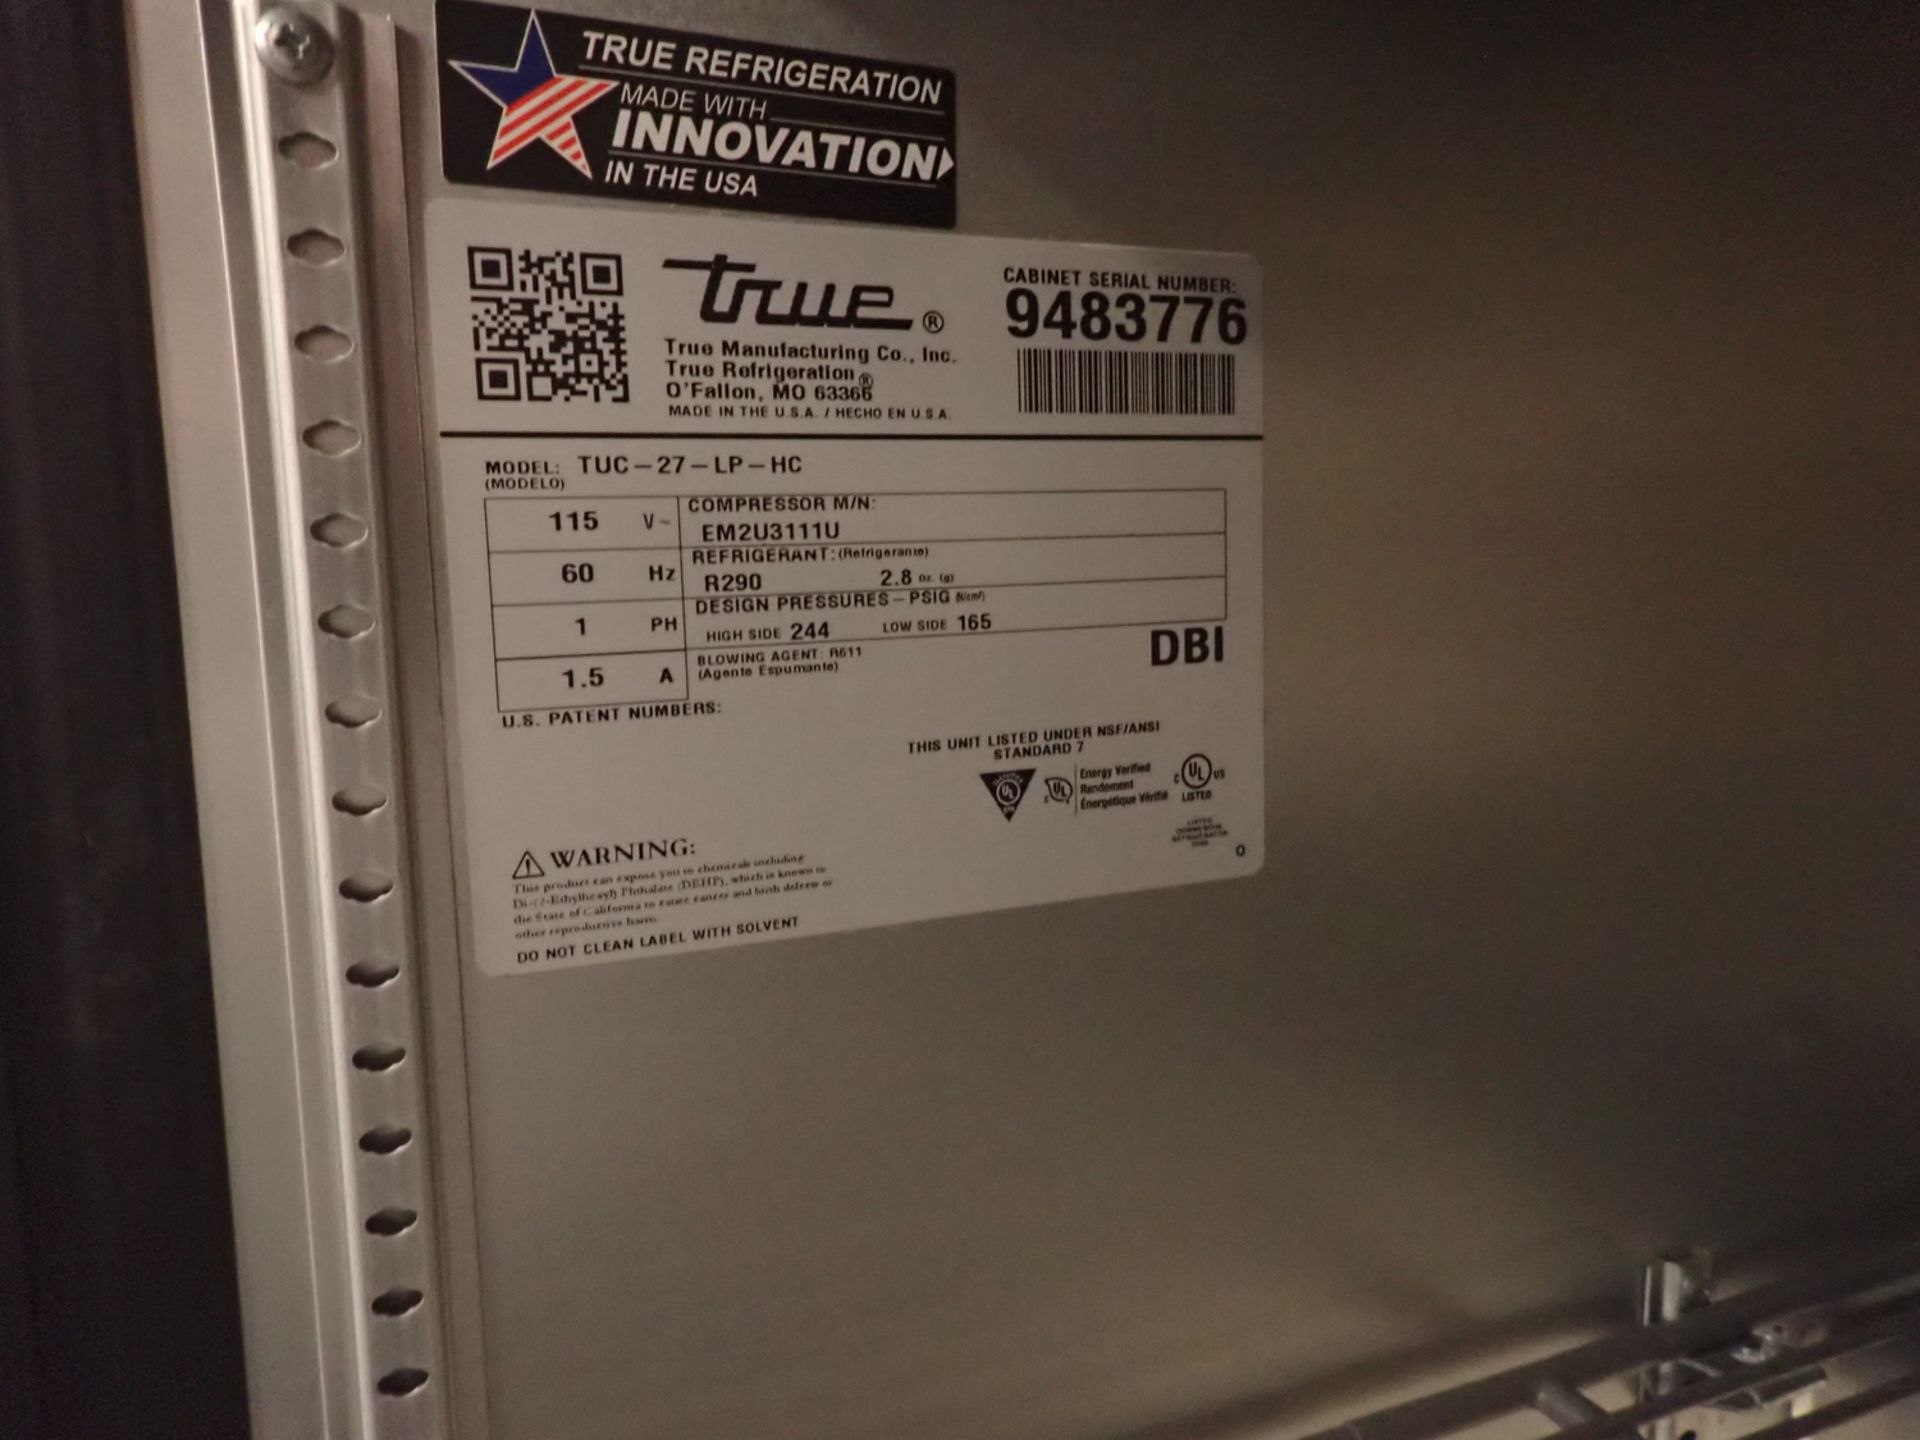 TRUE TUC-27-LP-HC 27" 1-DOOR UNDERCOUNTER STAINLESS STEEL REFRIGERATOR (115V) W/ CASTERS - Image 4 of 4